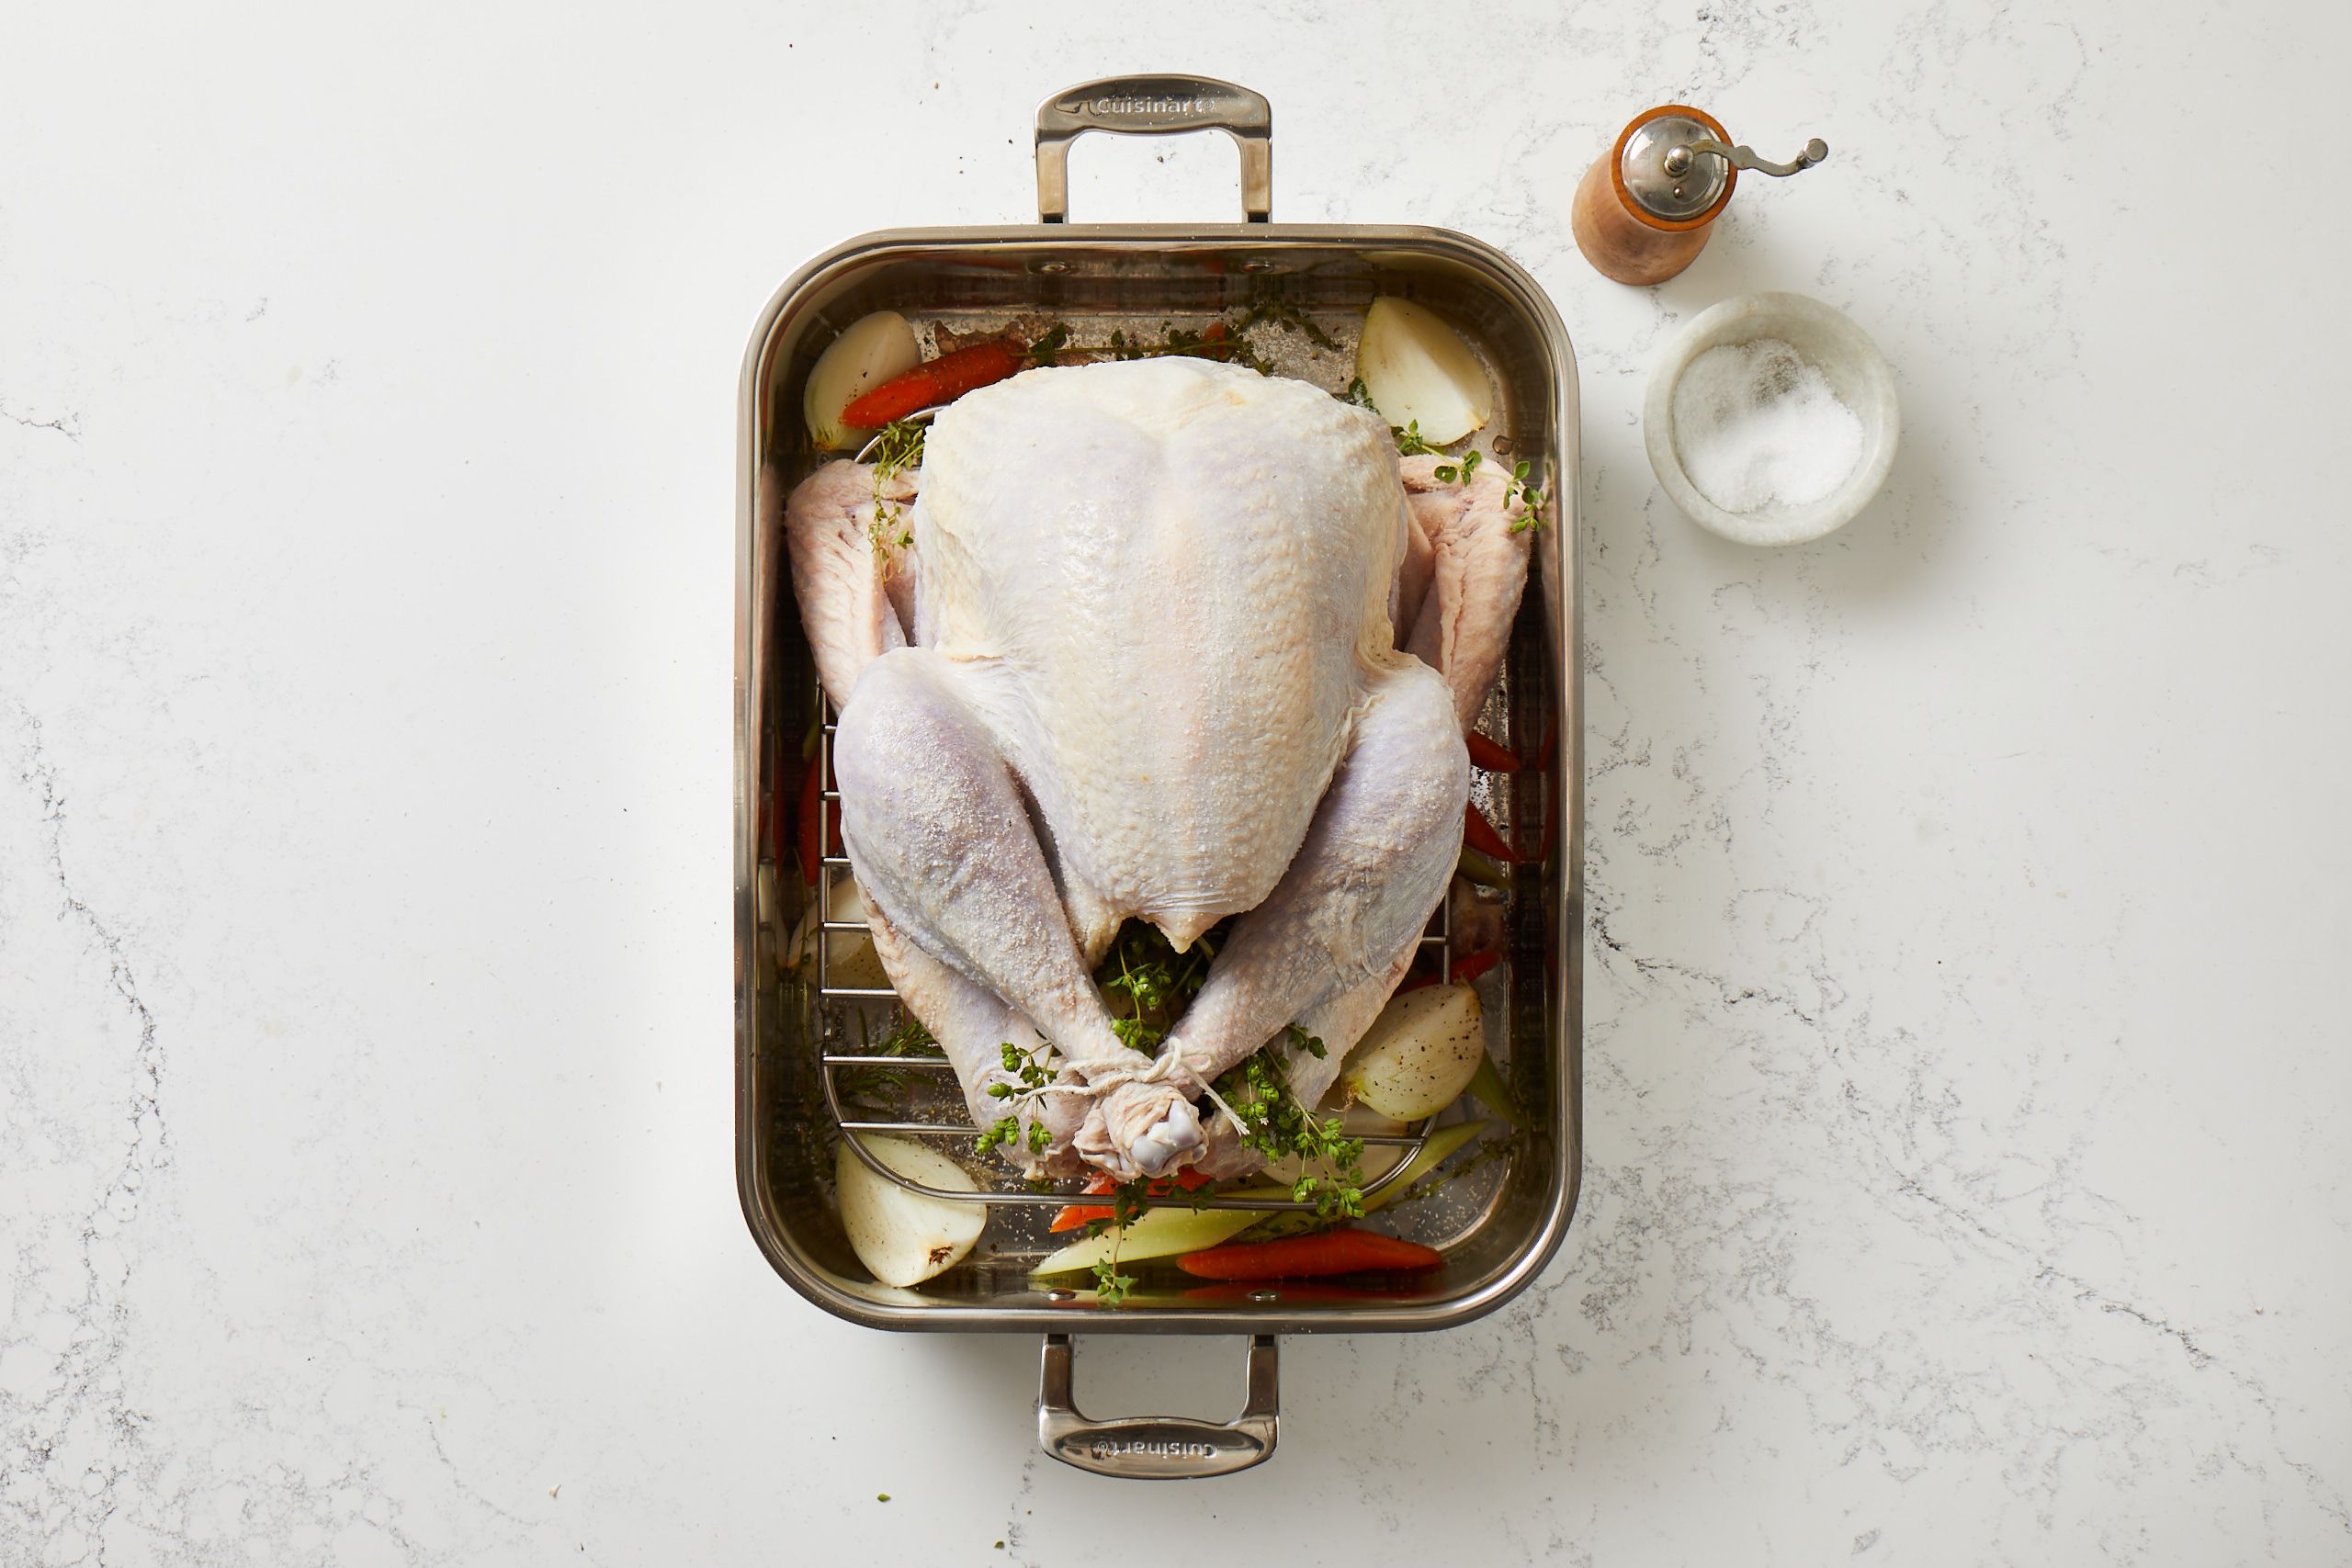 Is that a pop-up timer in your belly or are you just happy to see me; the  ups and downs of turkey temps